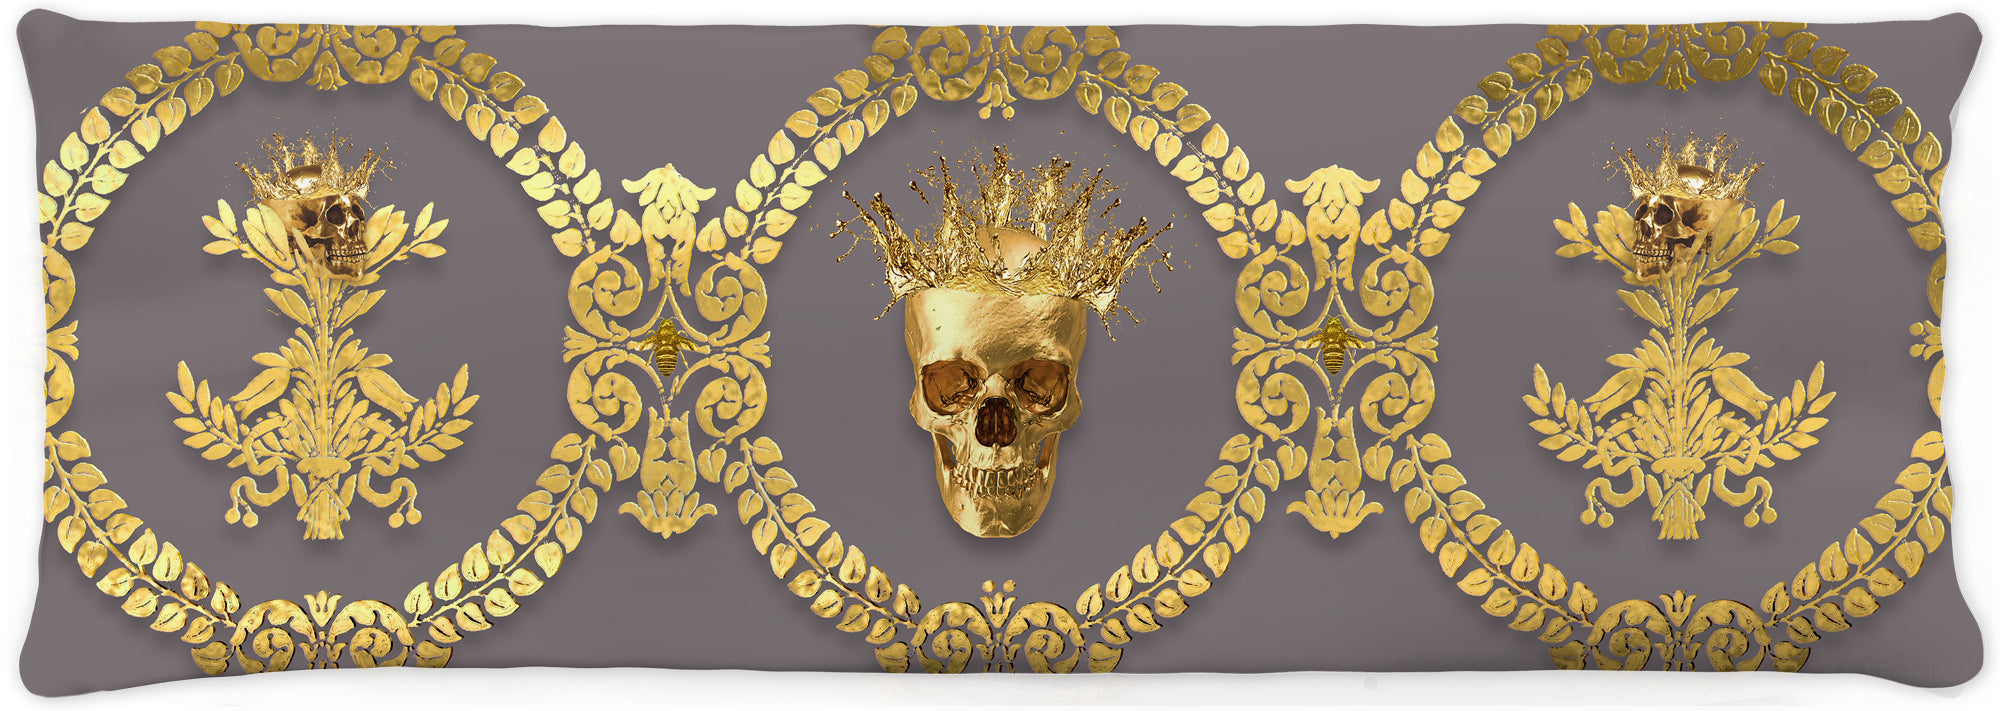 CROWN GOLD SKULL-GOLD RIBS-Body Pillow-PILLOW CASE- color LAVENDER STEEL, NEUTRAL PURPLE